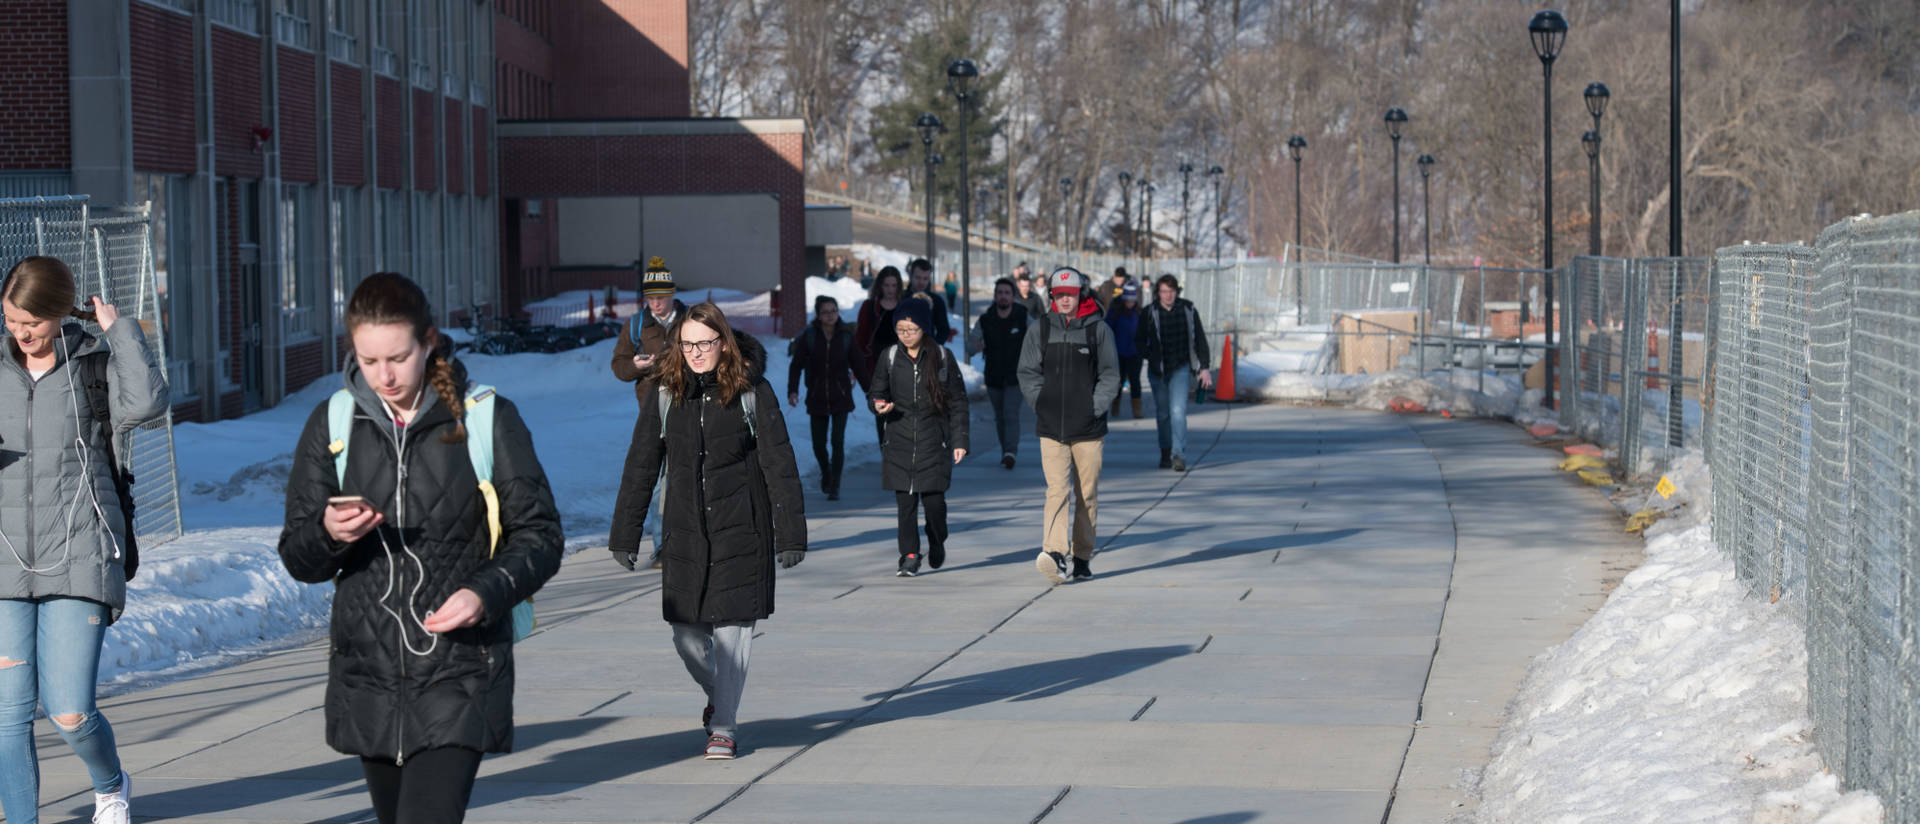 Students on campus in early spring